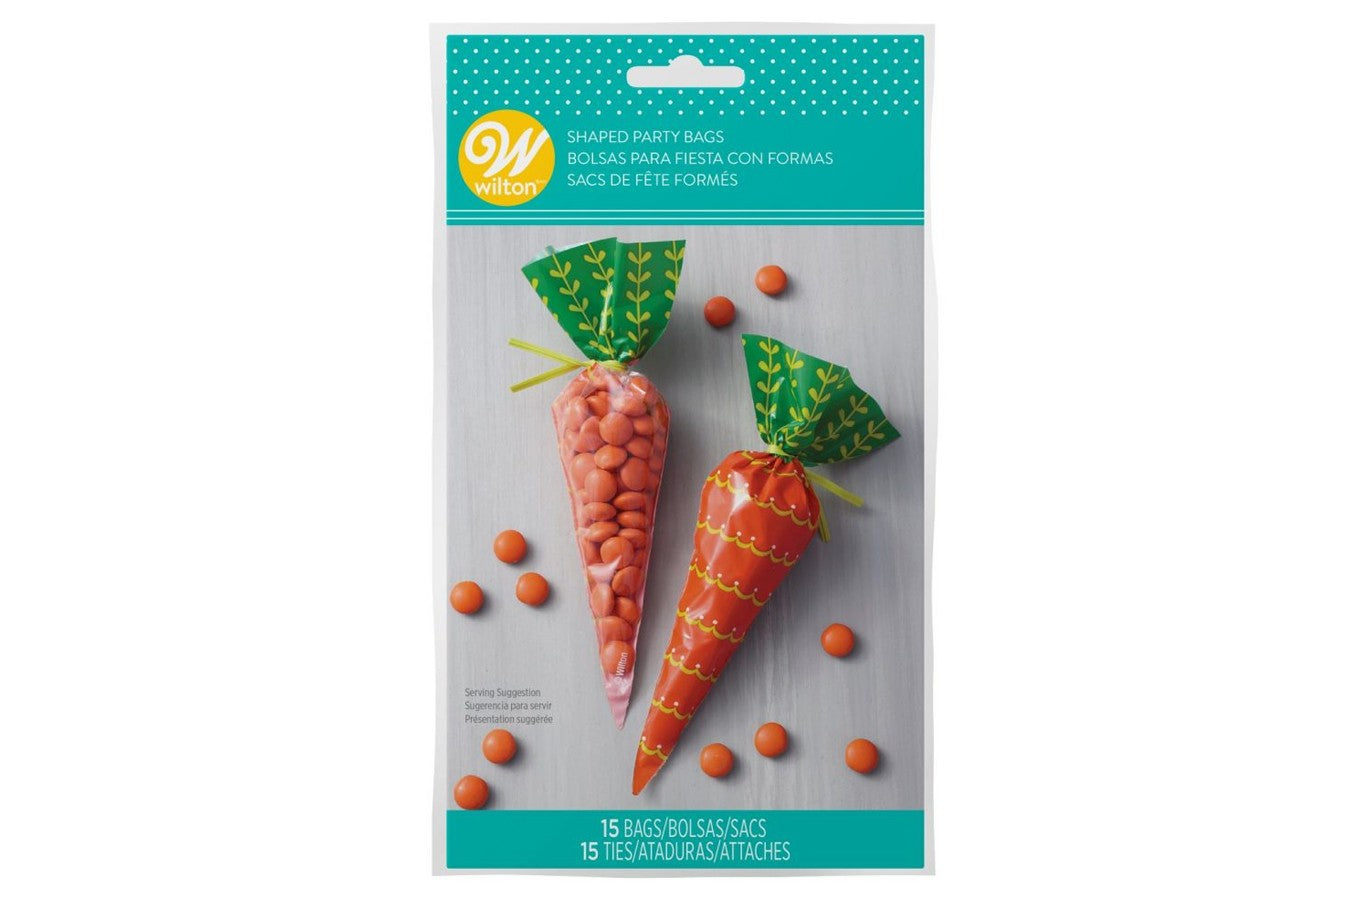 Wilton Easter Carrot Shaped Sweet Treat Bags - The Cooks Cupboard Ltd